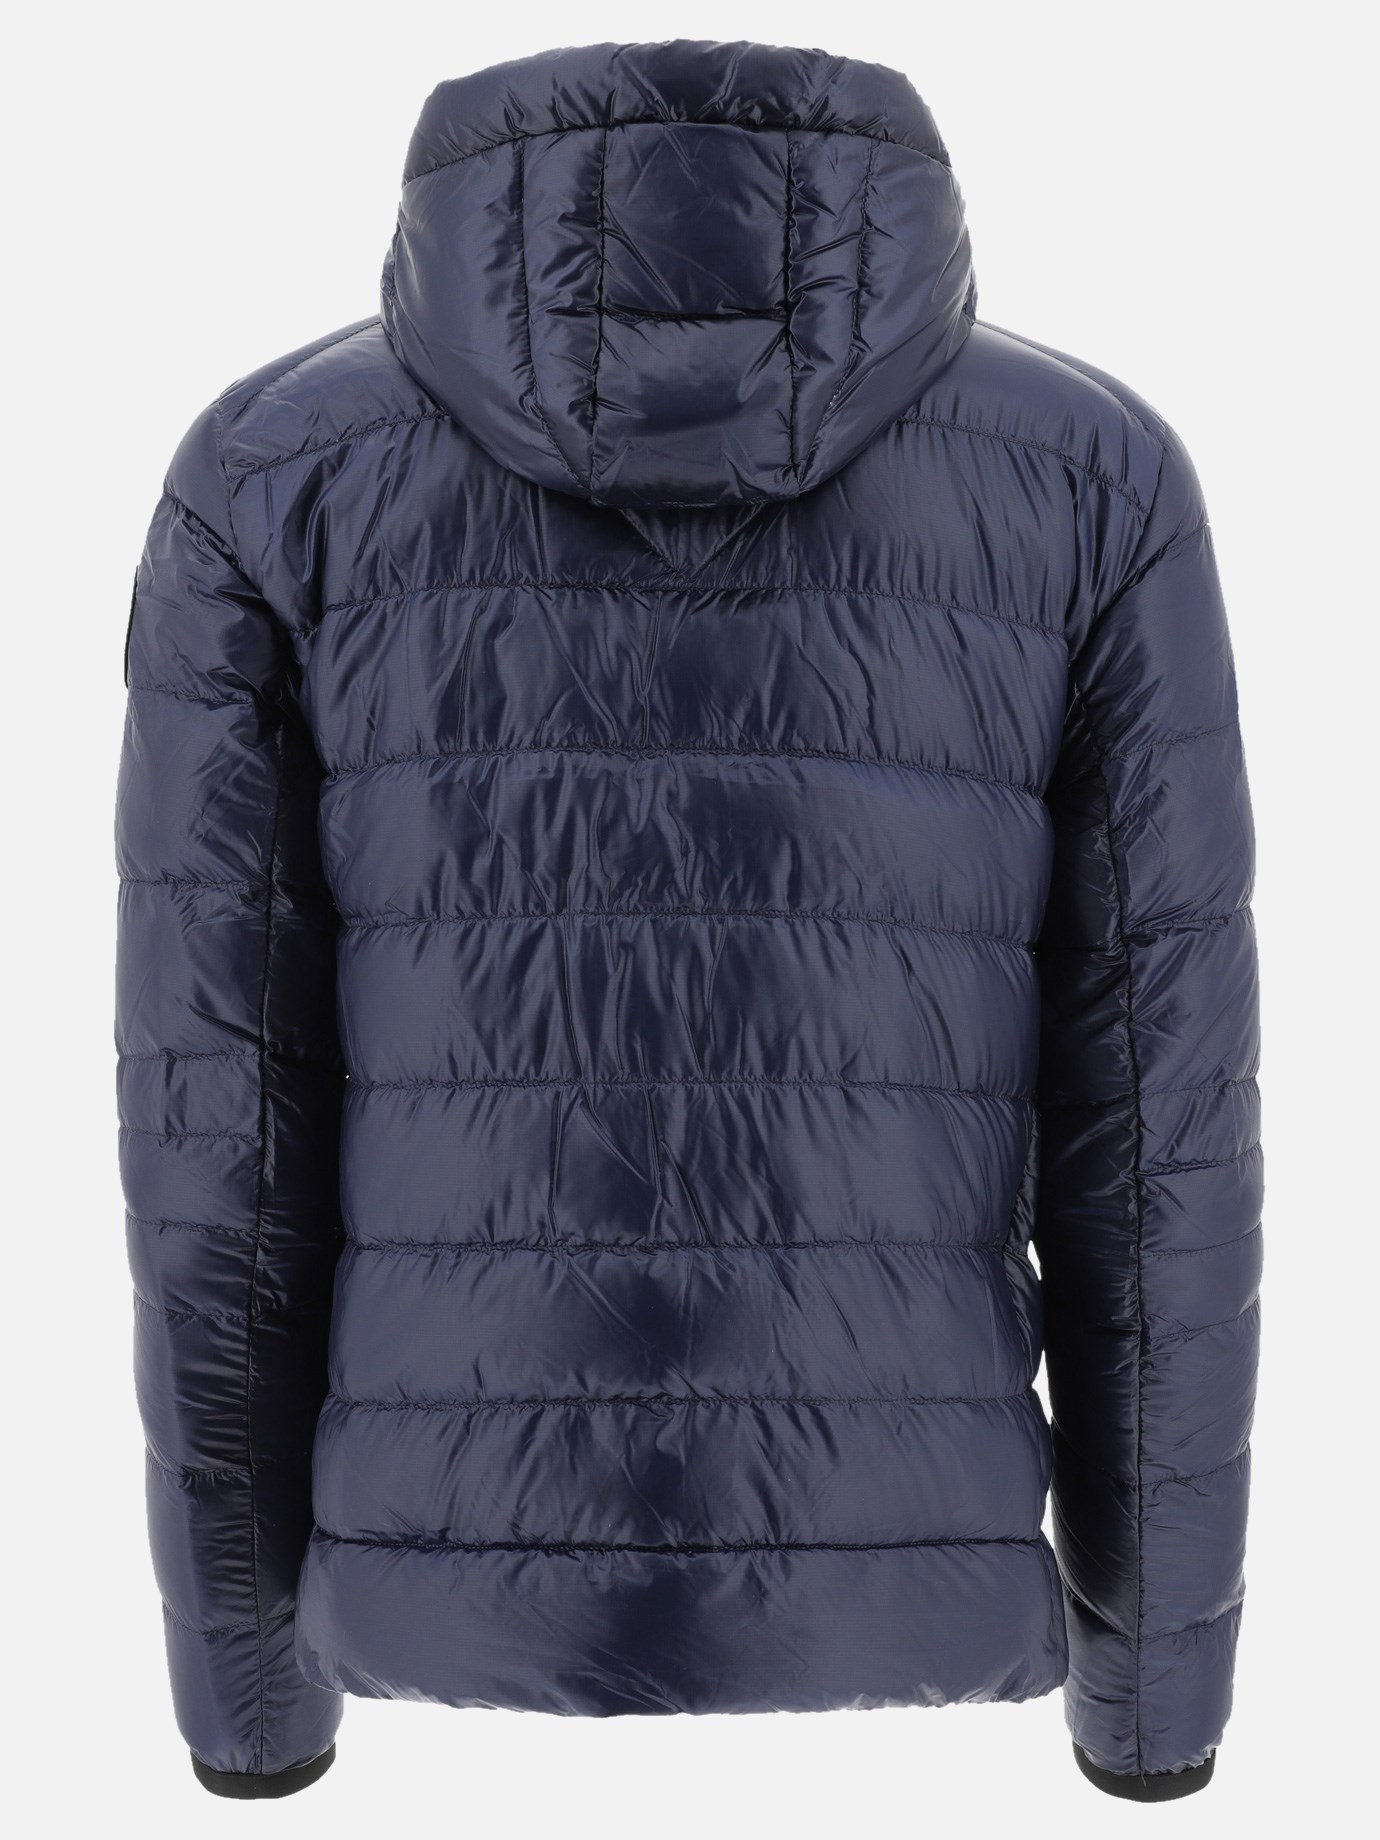  Crofton  down jacket by Canada Goose